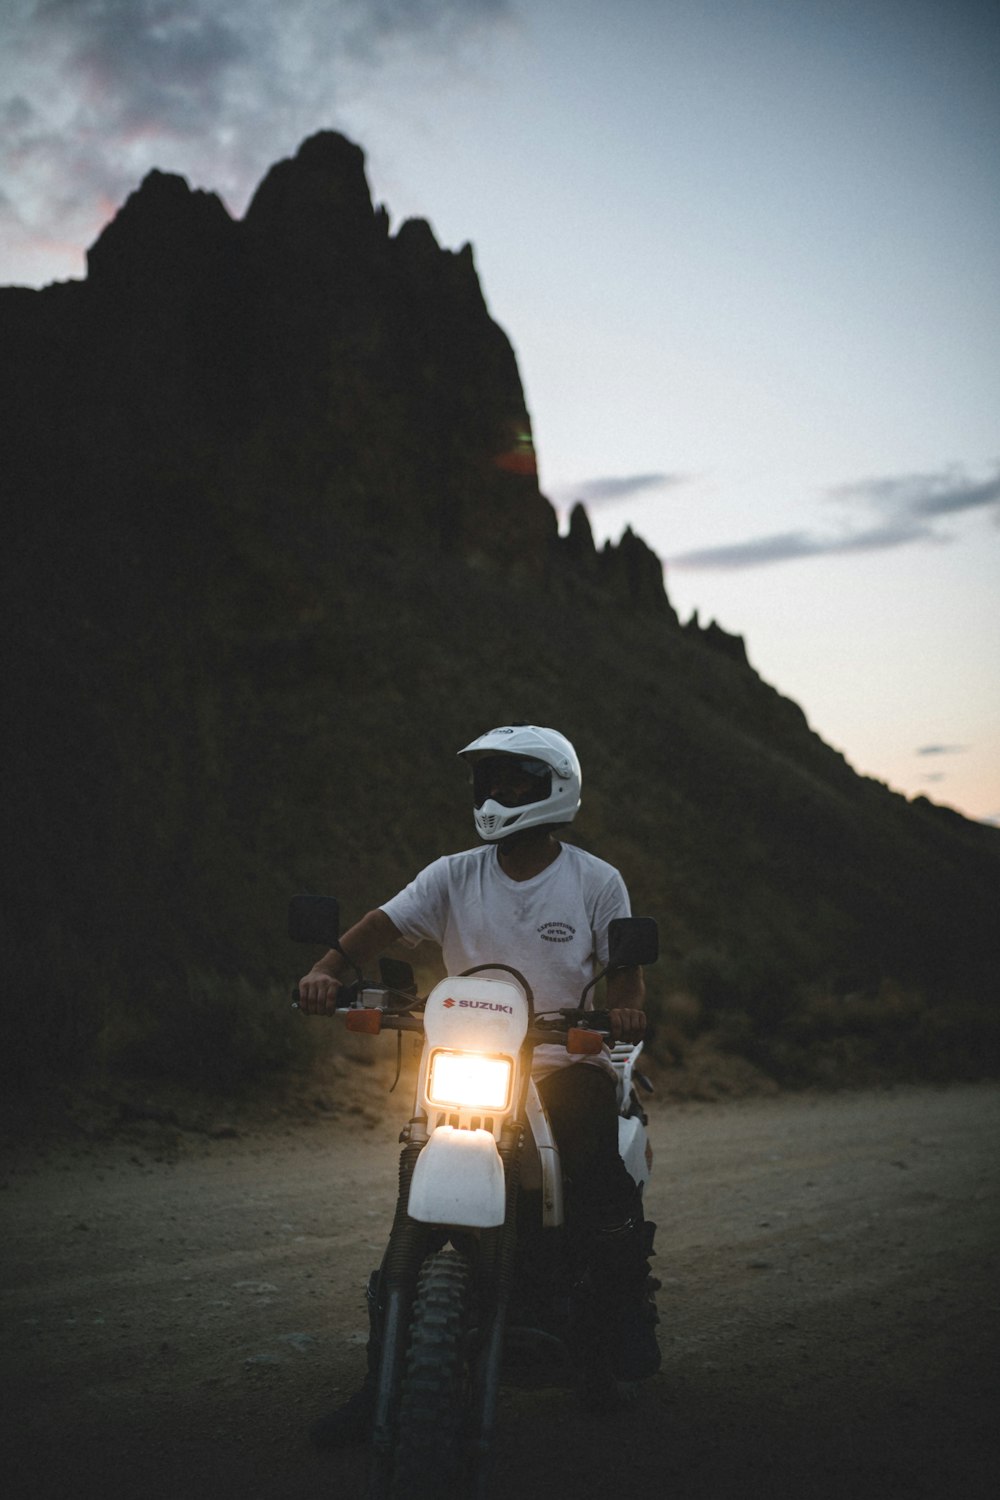 man in white helmet riding motorcycle on gray sand during daytime